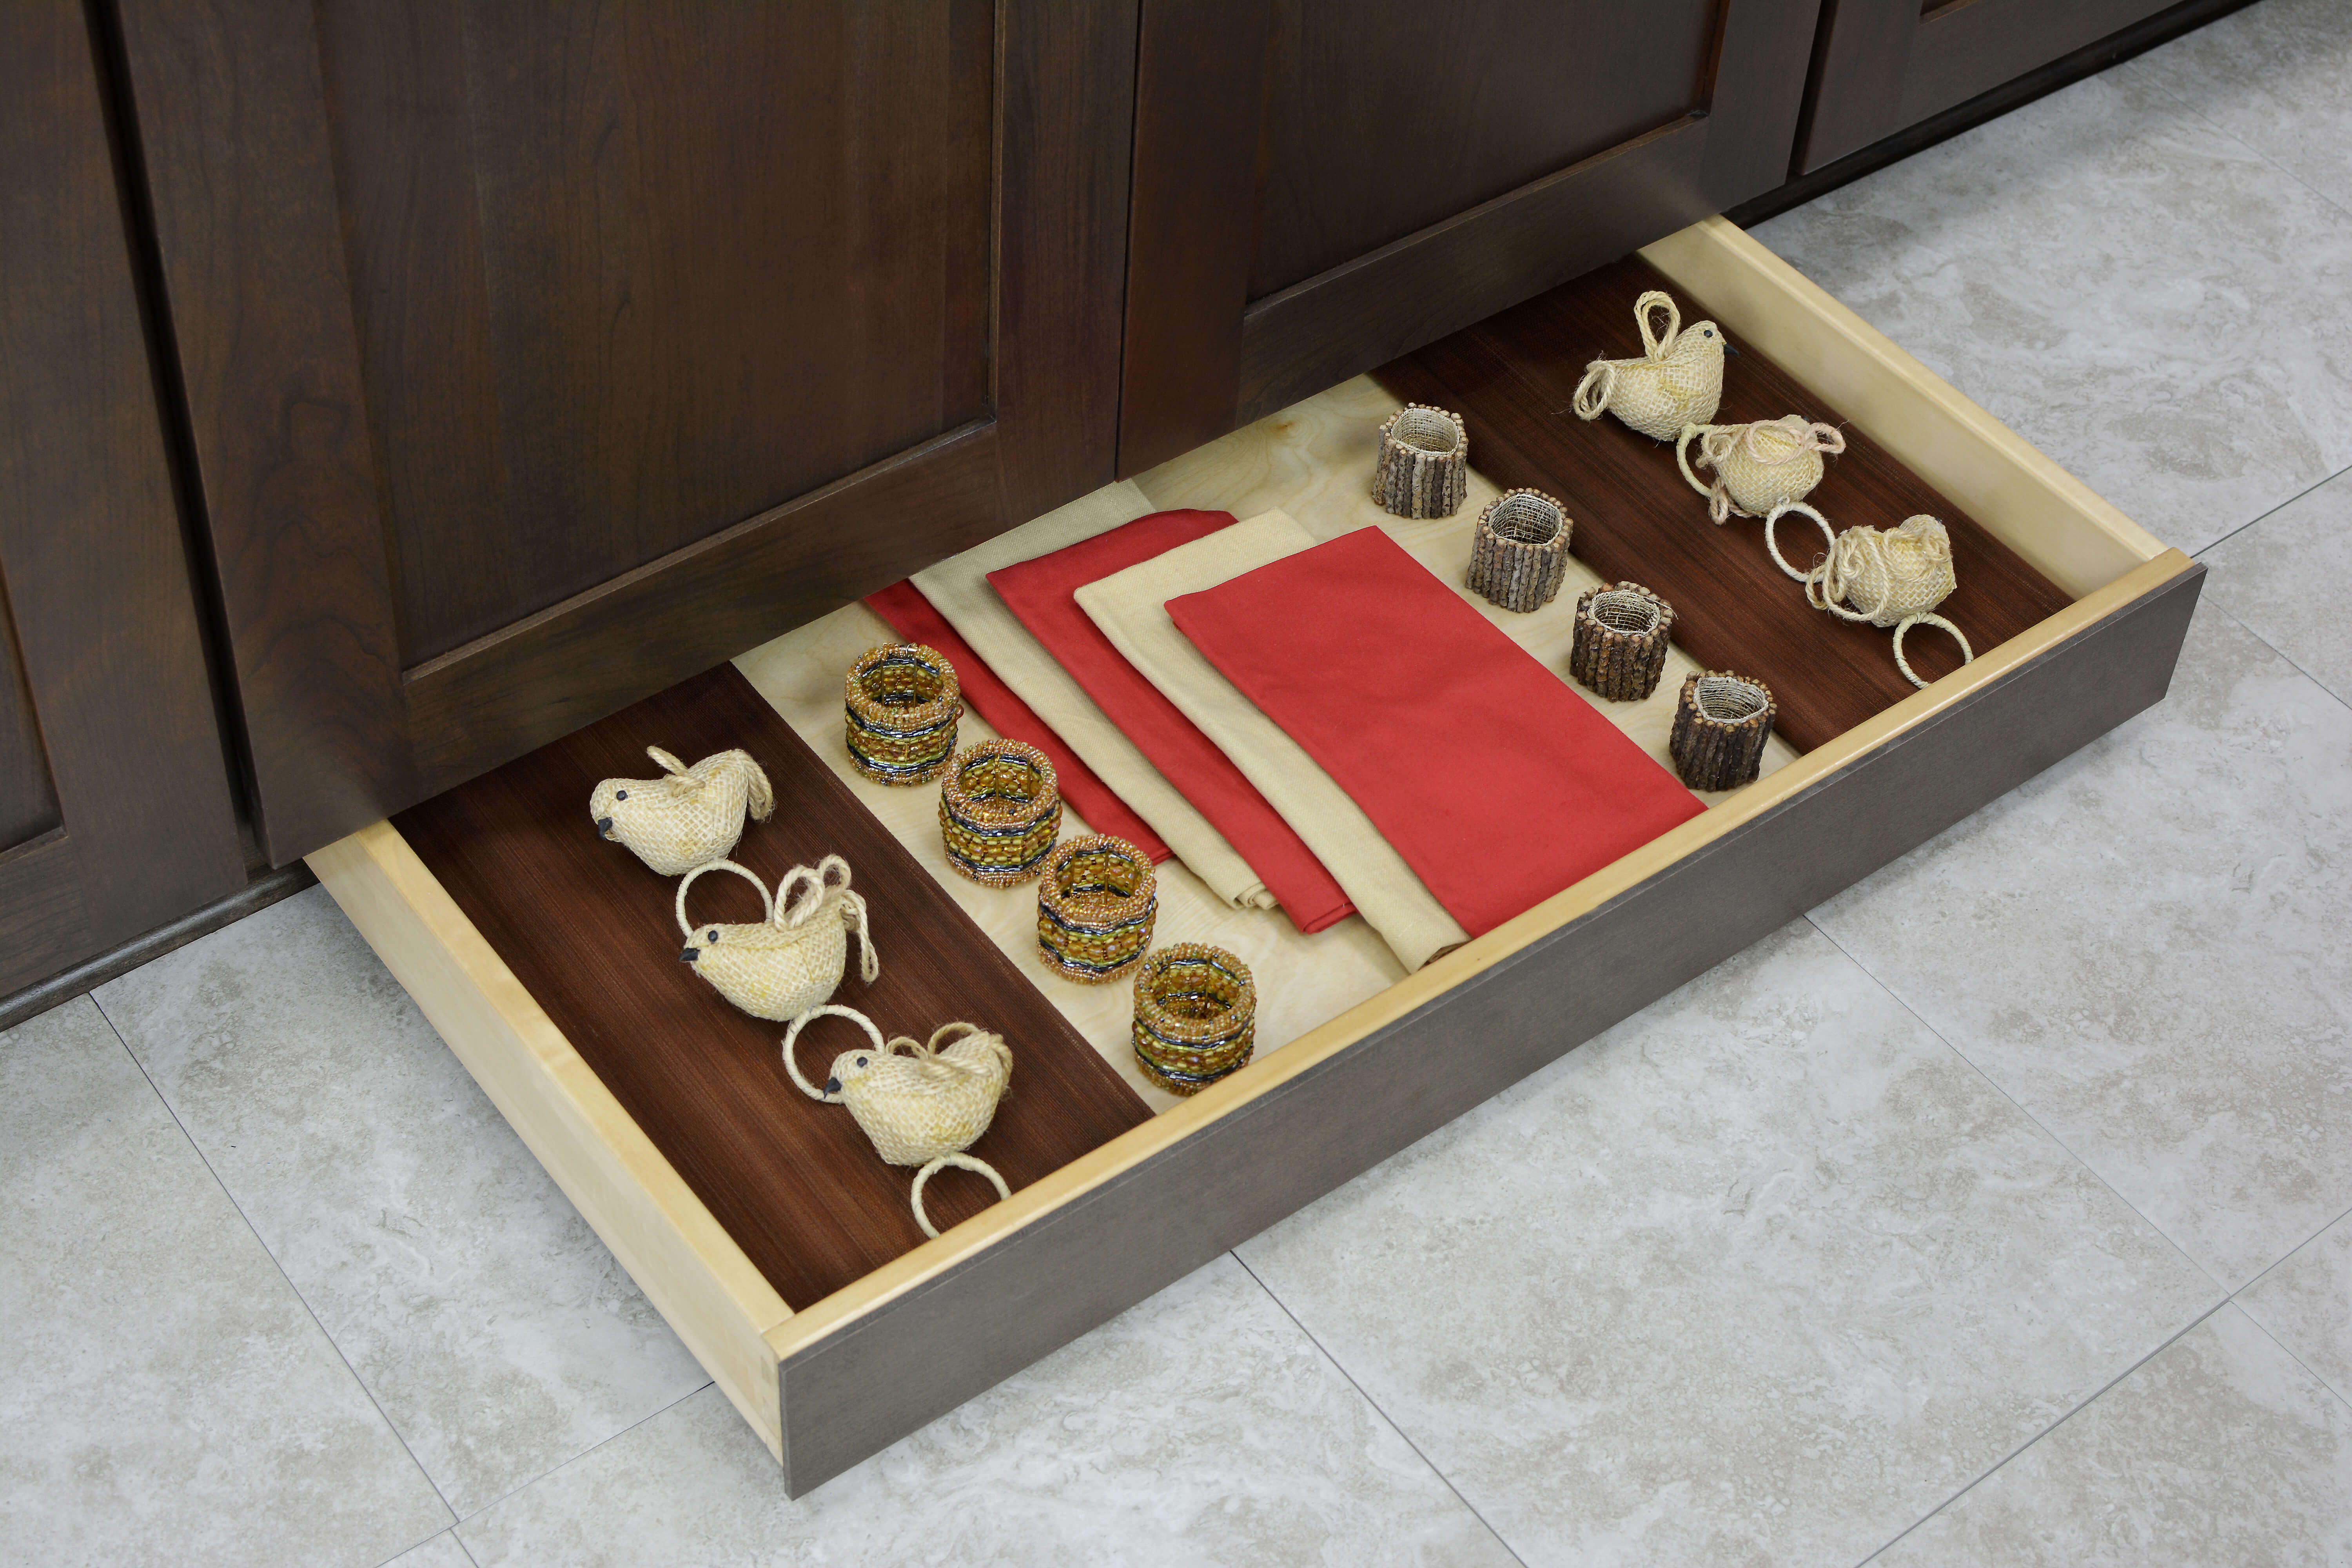 Two-Tier Drawer with Drawer K-Cup Organizer - Dura Supreme Cabinetry